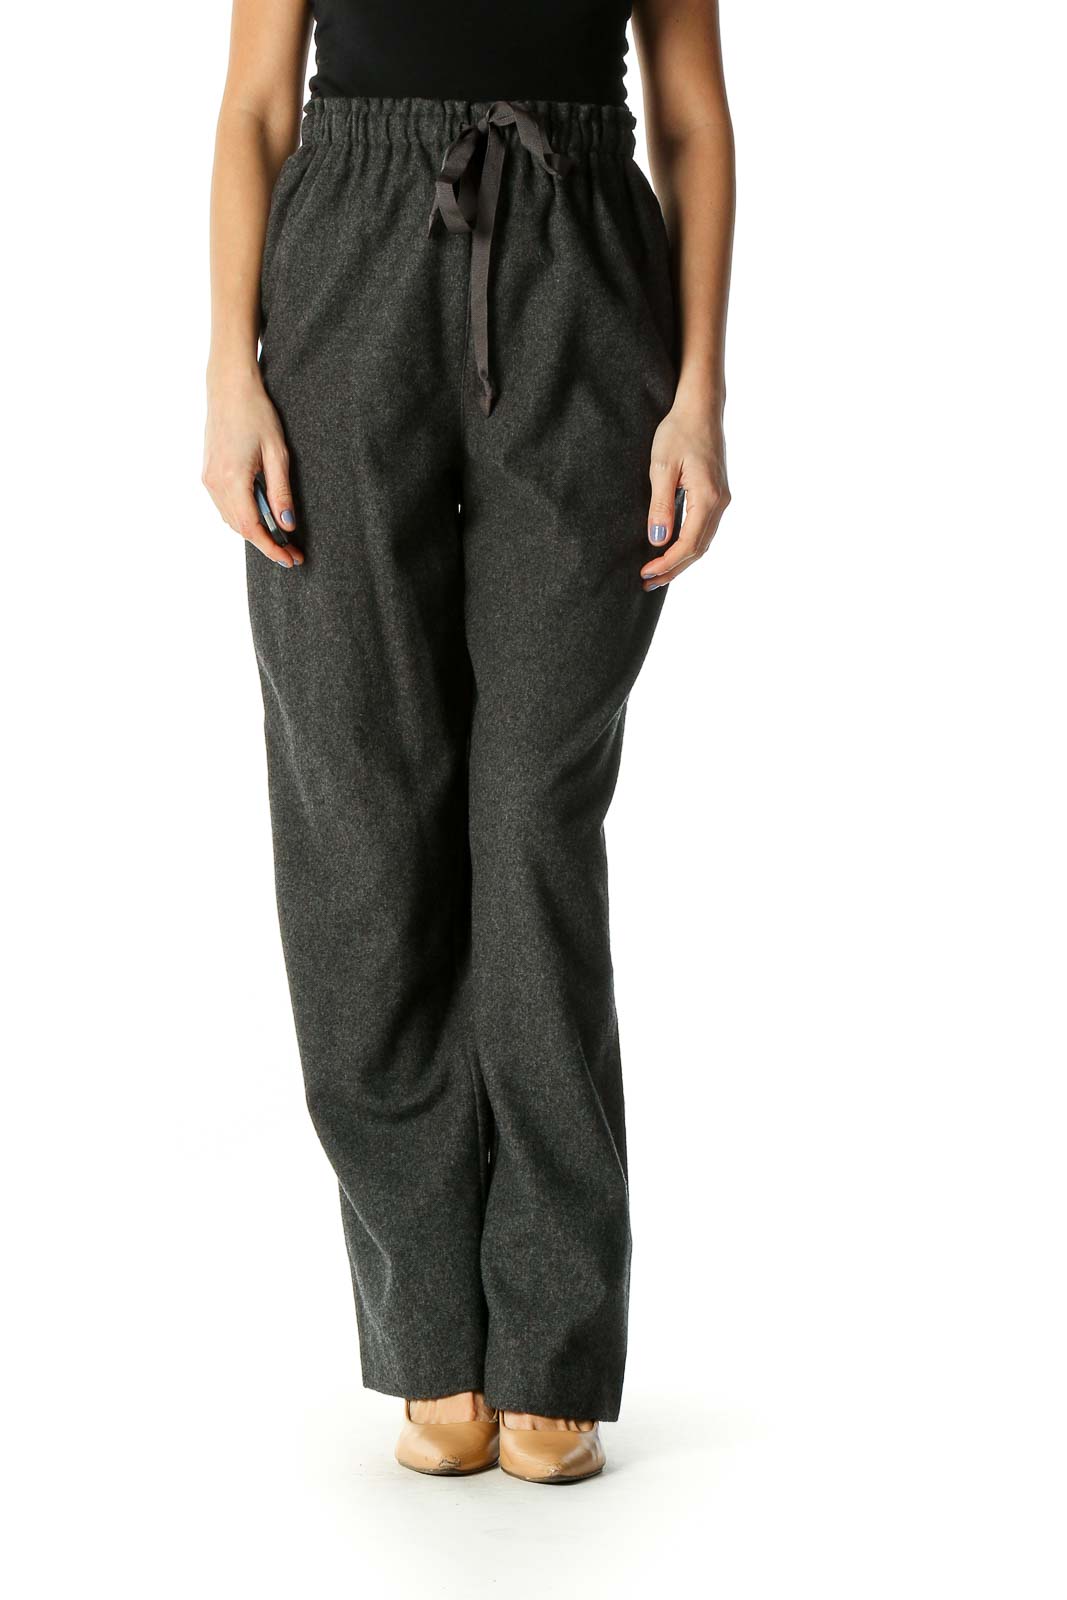 Gray Solid Sweatpants Front